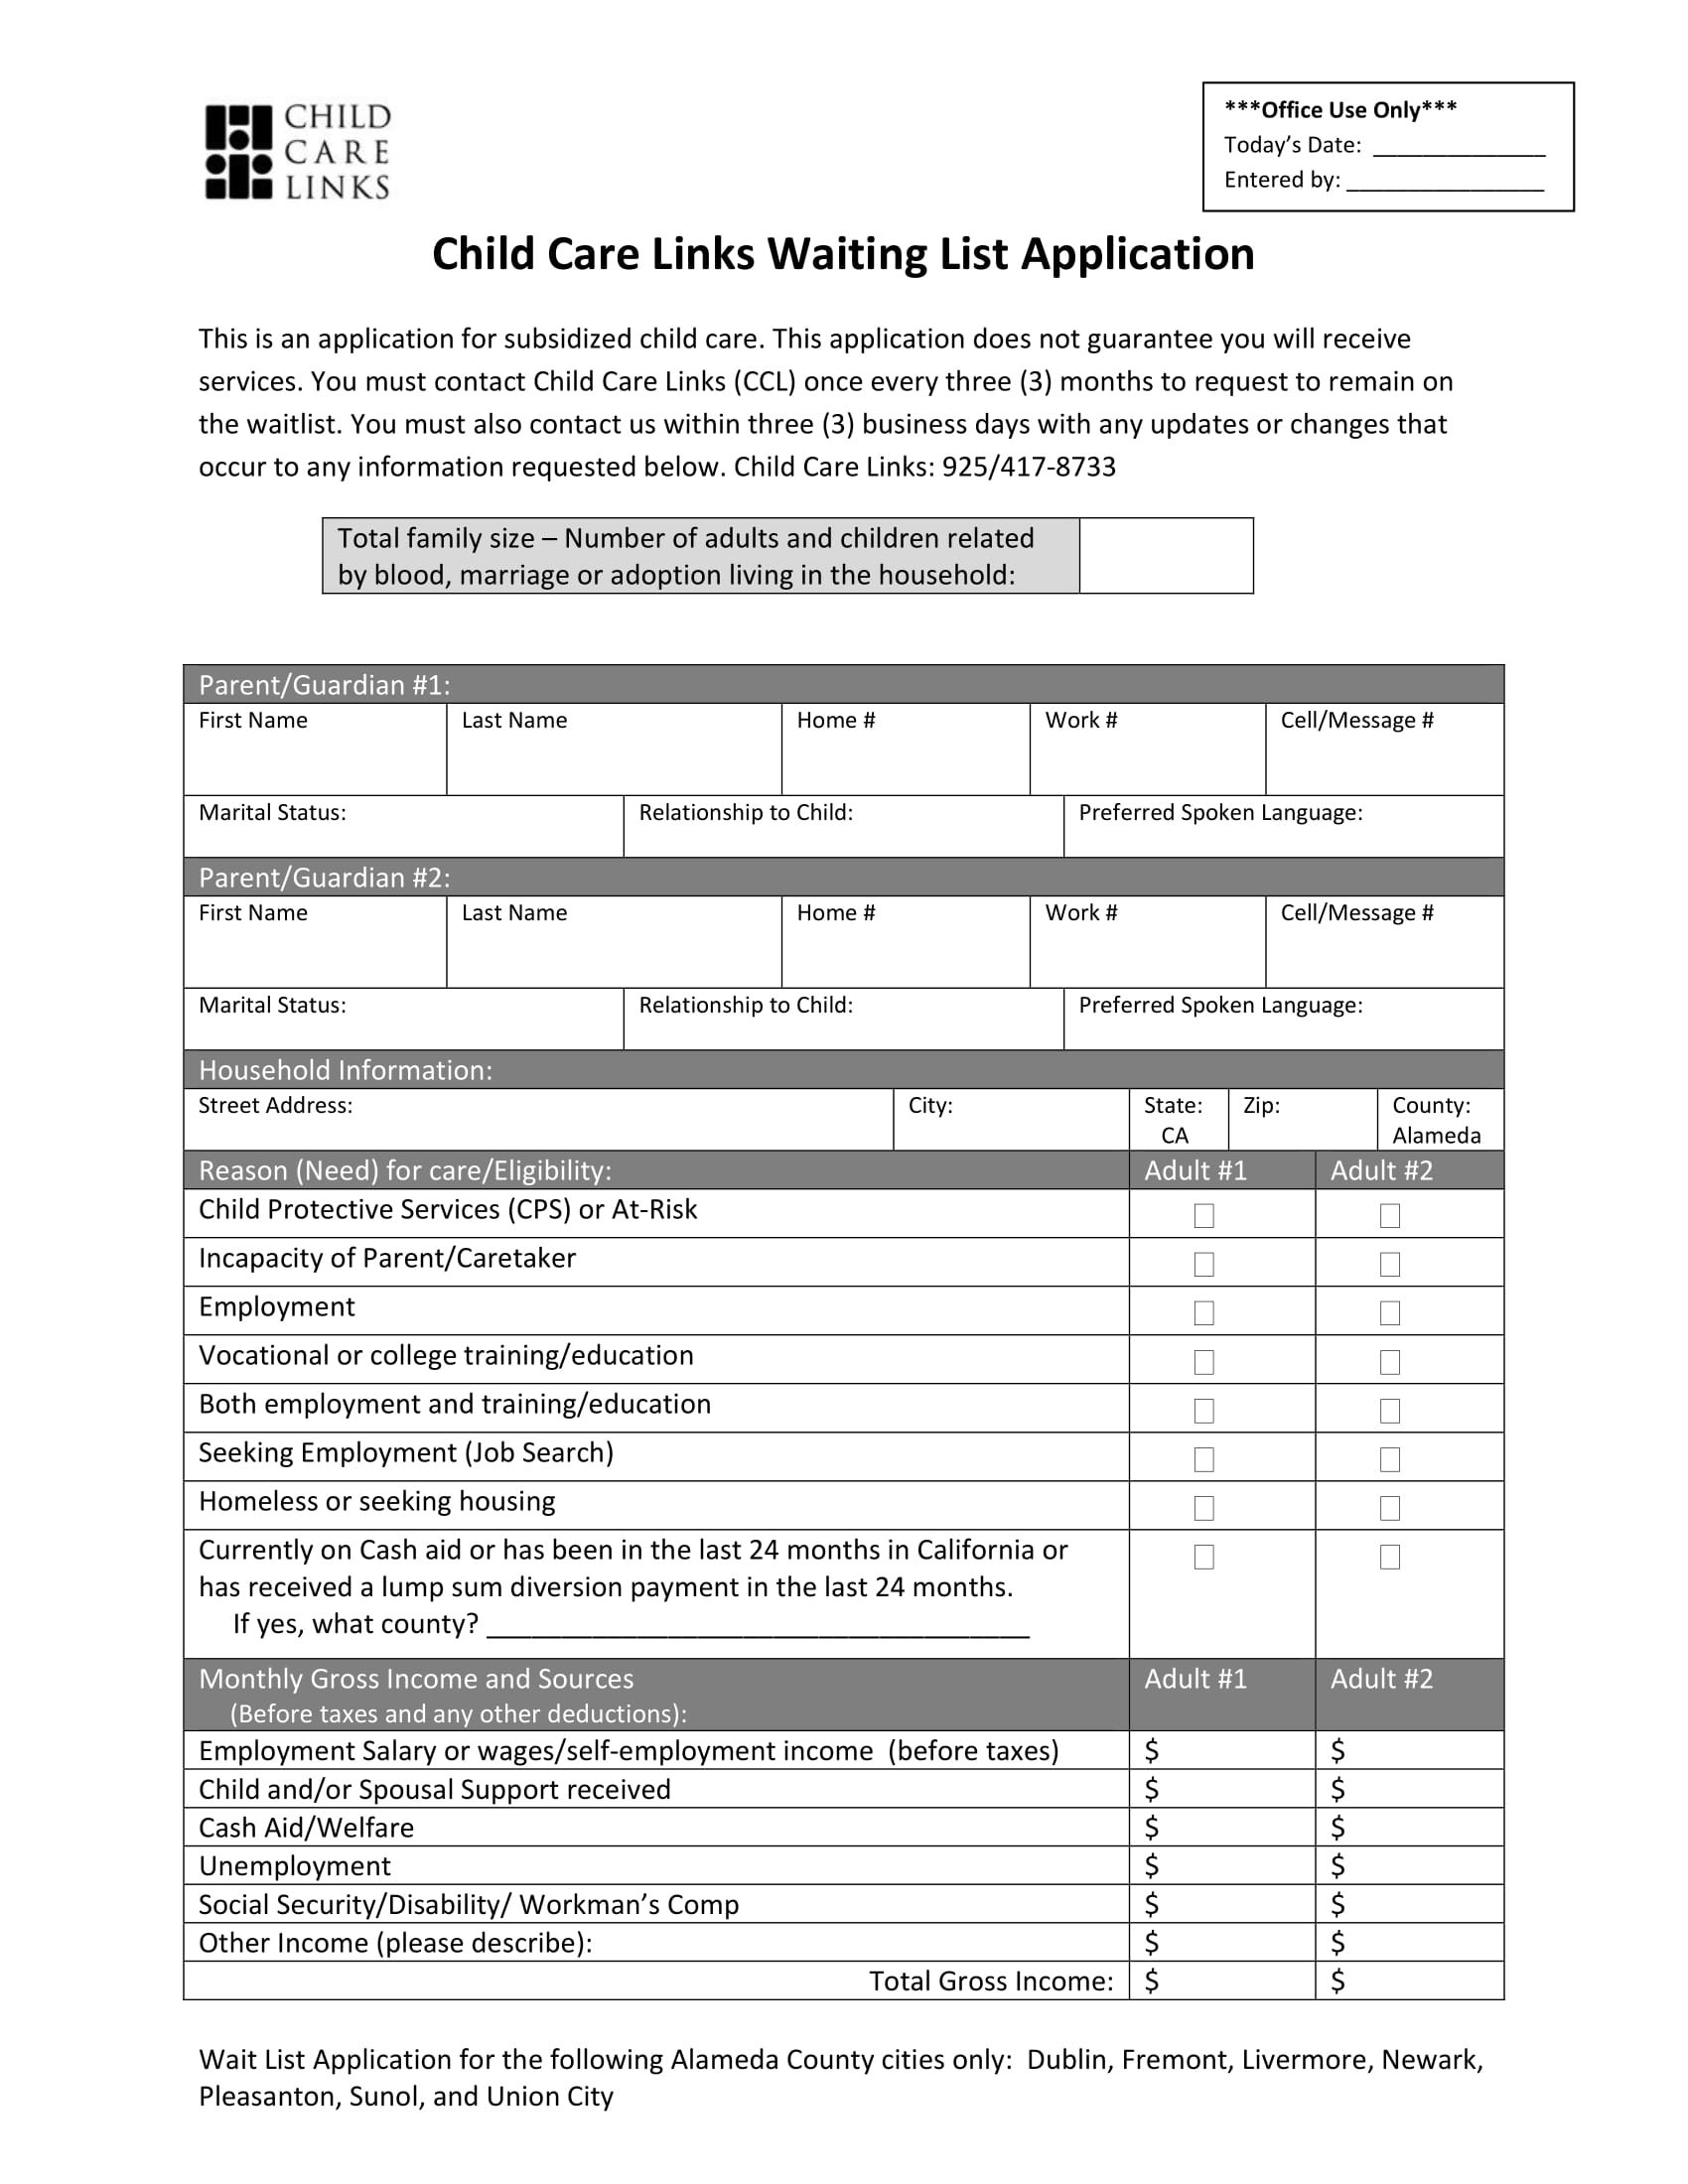 child care waiting list application form 1